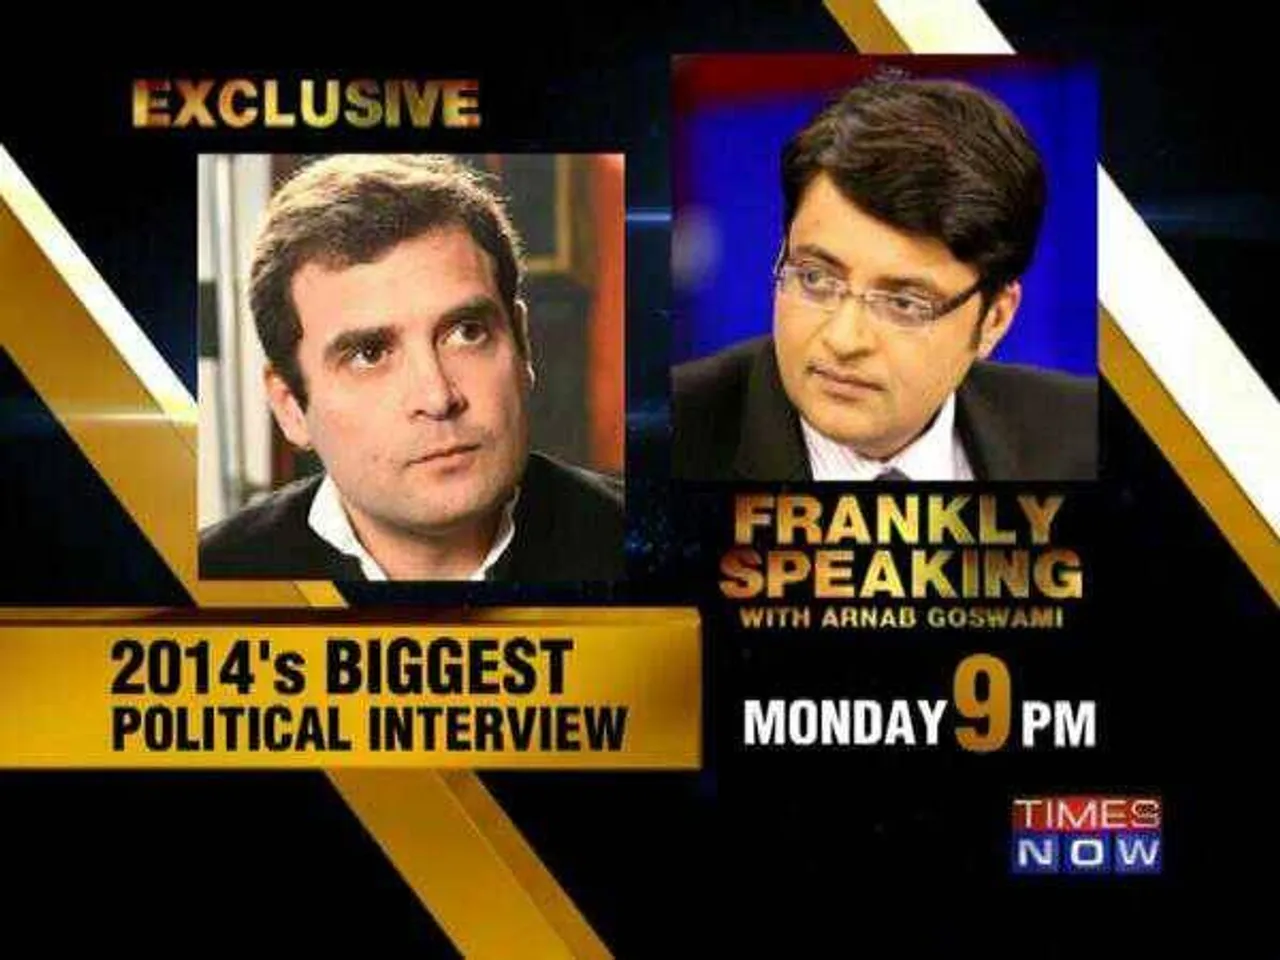 [Infographic] Social Media Report on Arnab's Interview with Rahul Gandhi